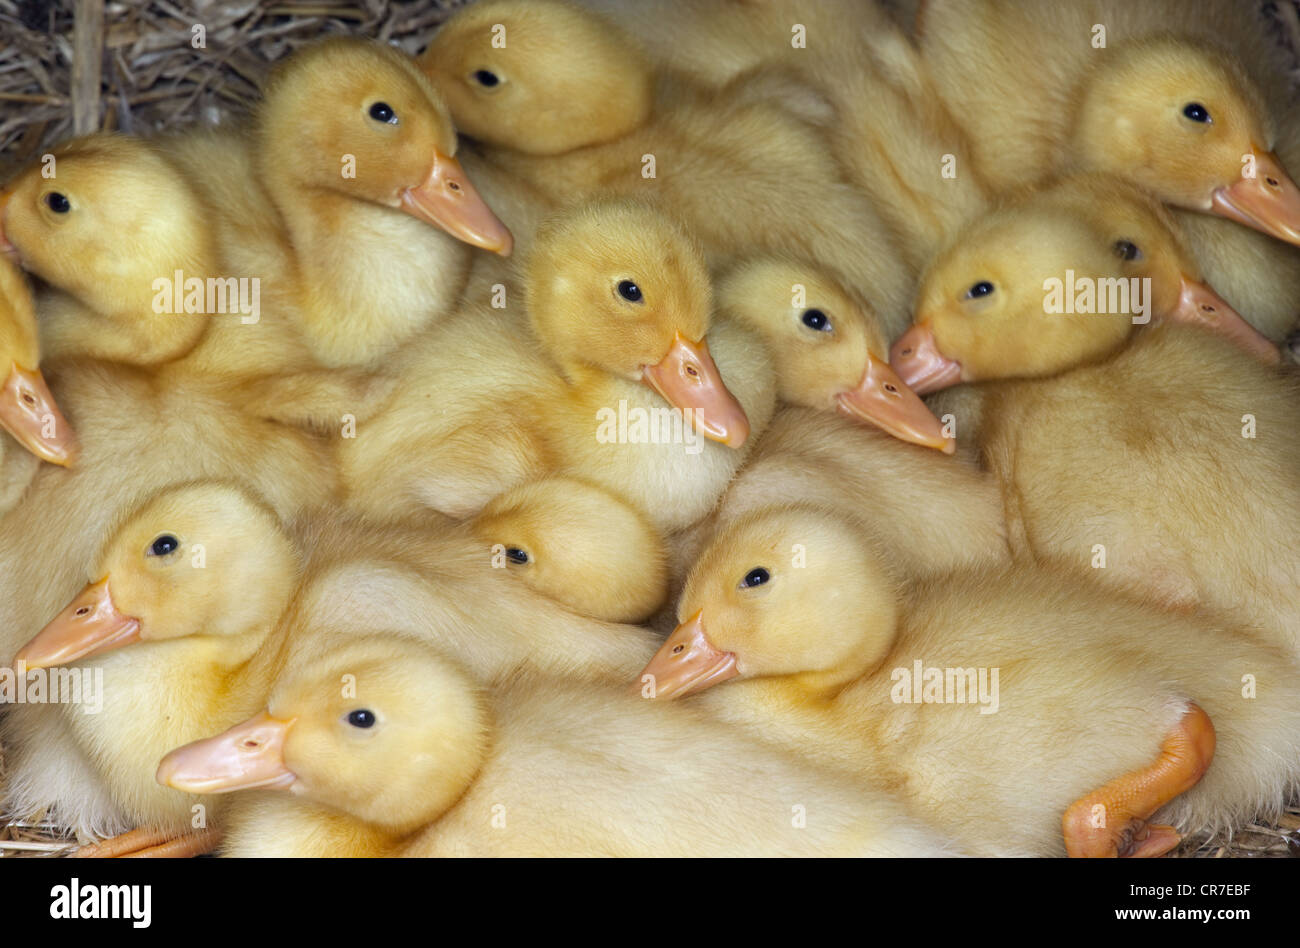 A large brood of  ducklings at one week old Stock Photo